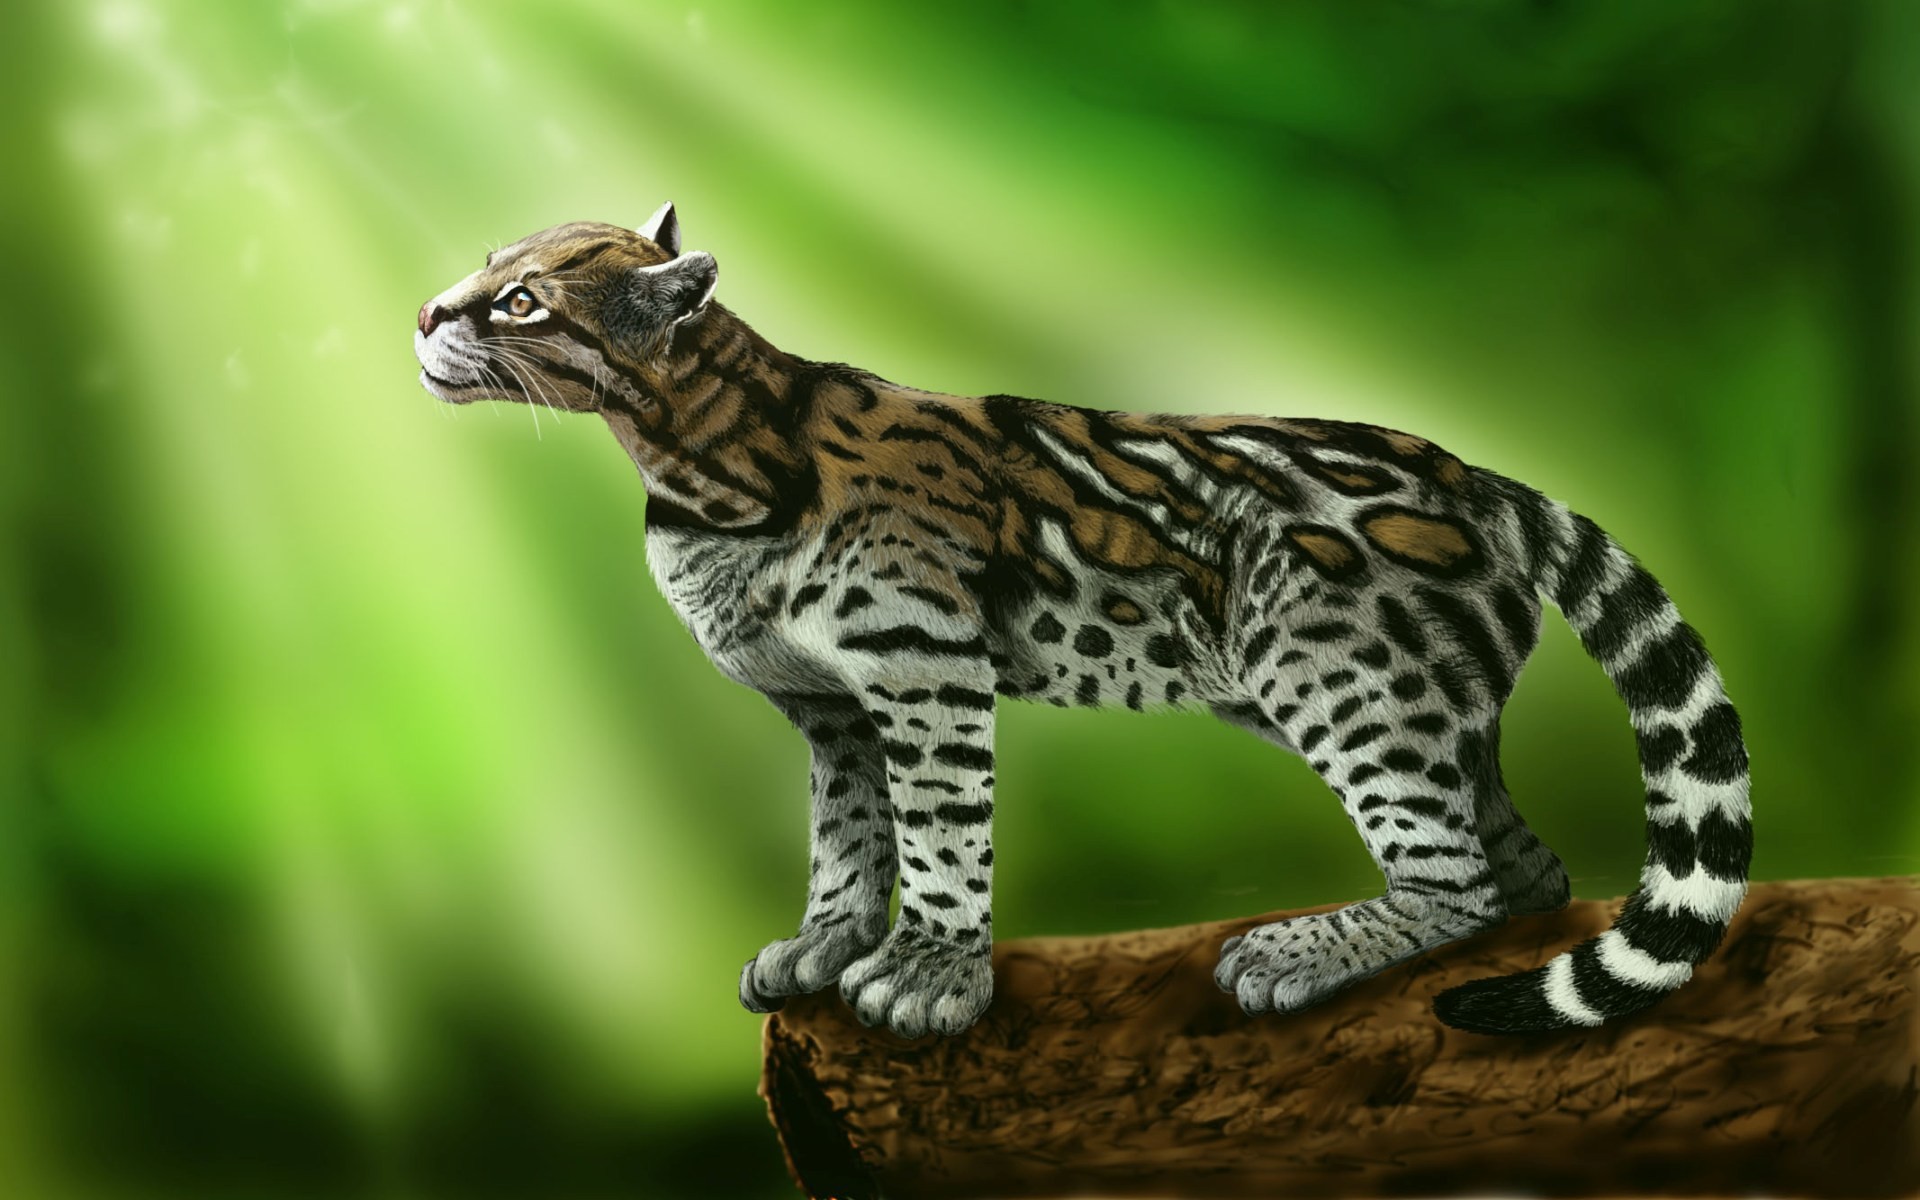 Ocelot Cat On A Green Background Wallpaper And Image